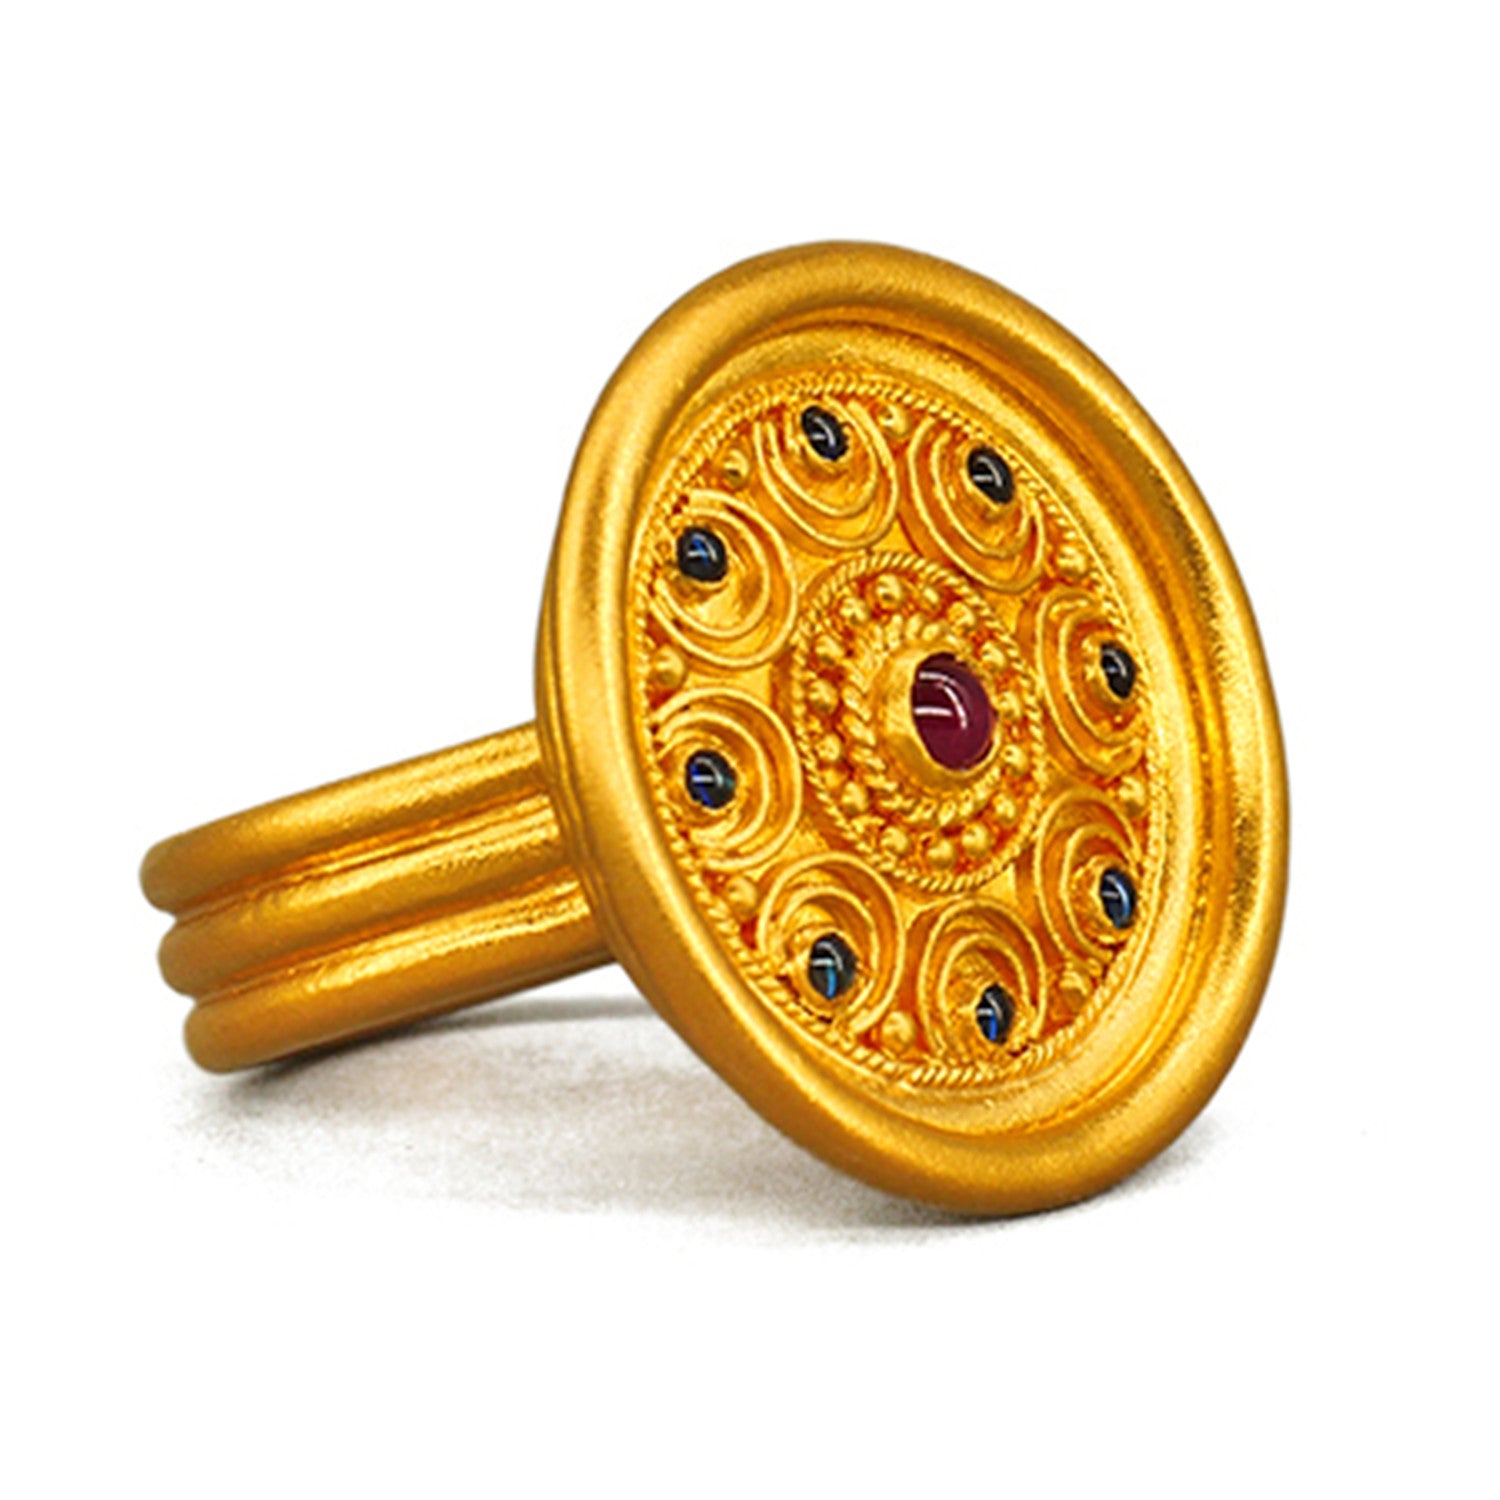 EVECOCO Full Gold Ring Hand Forging With Sculpted Reliefs,Gemstone